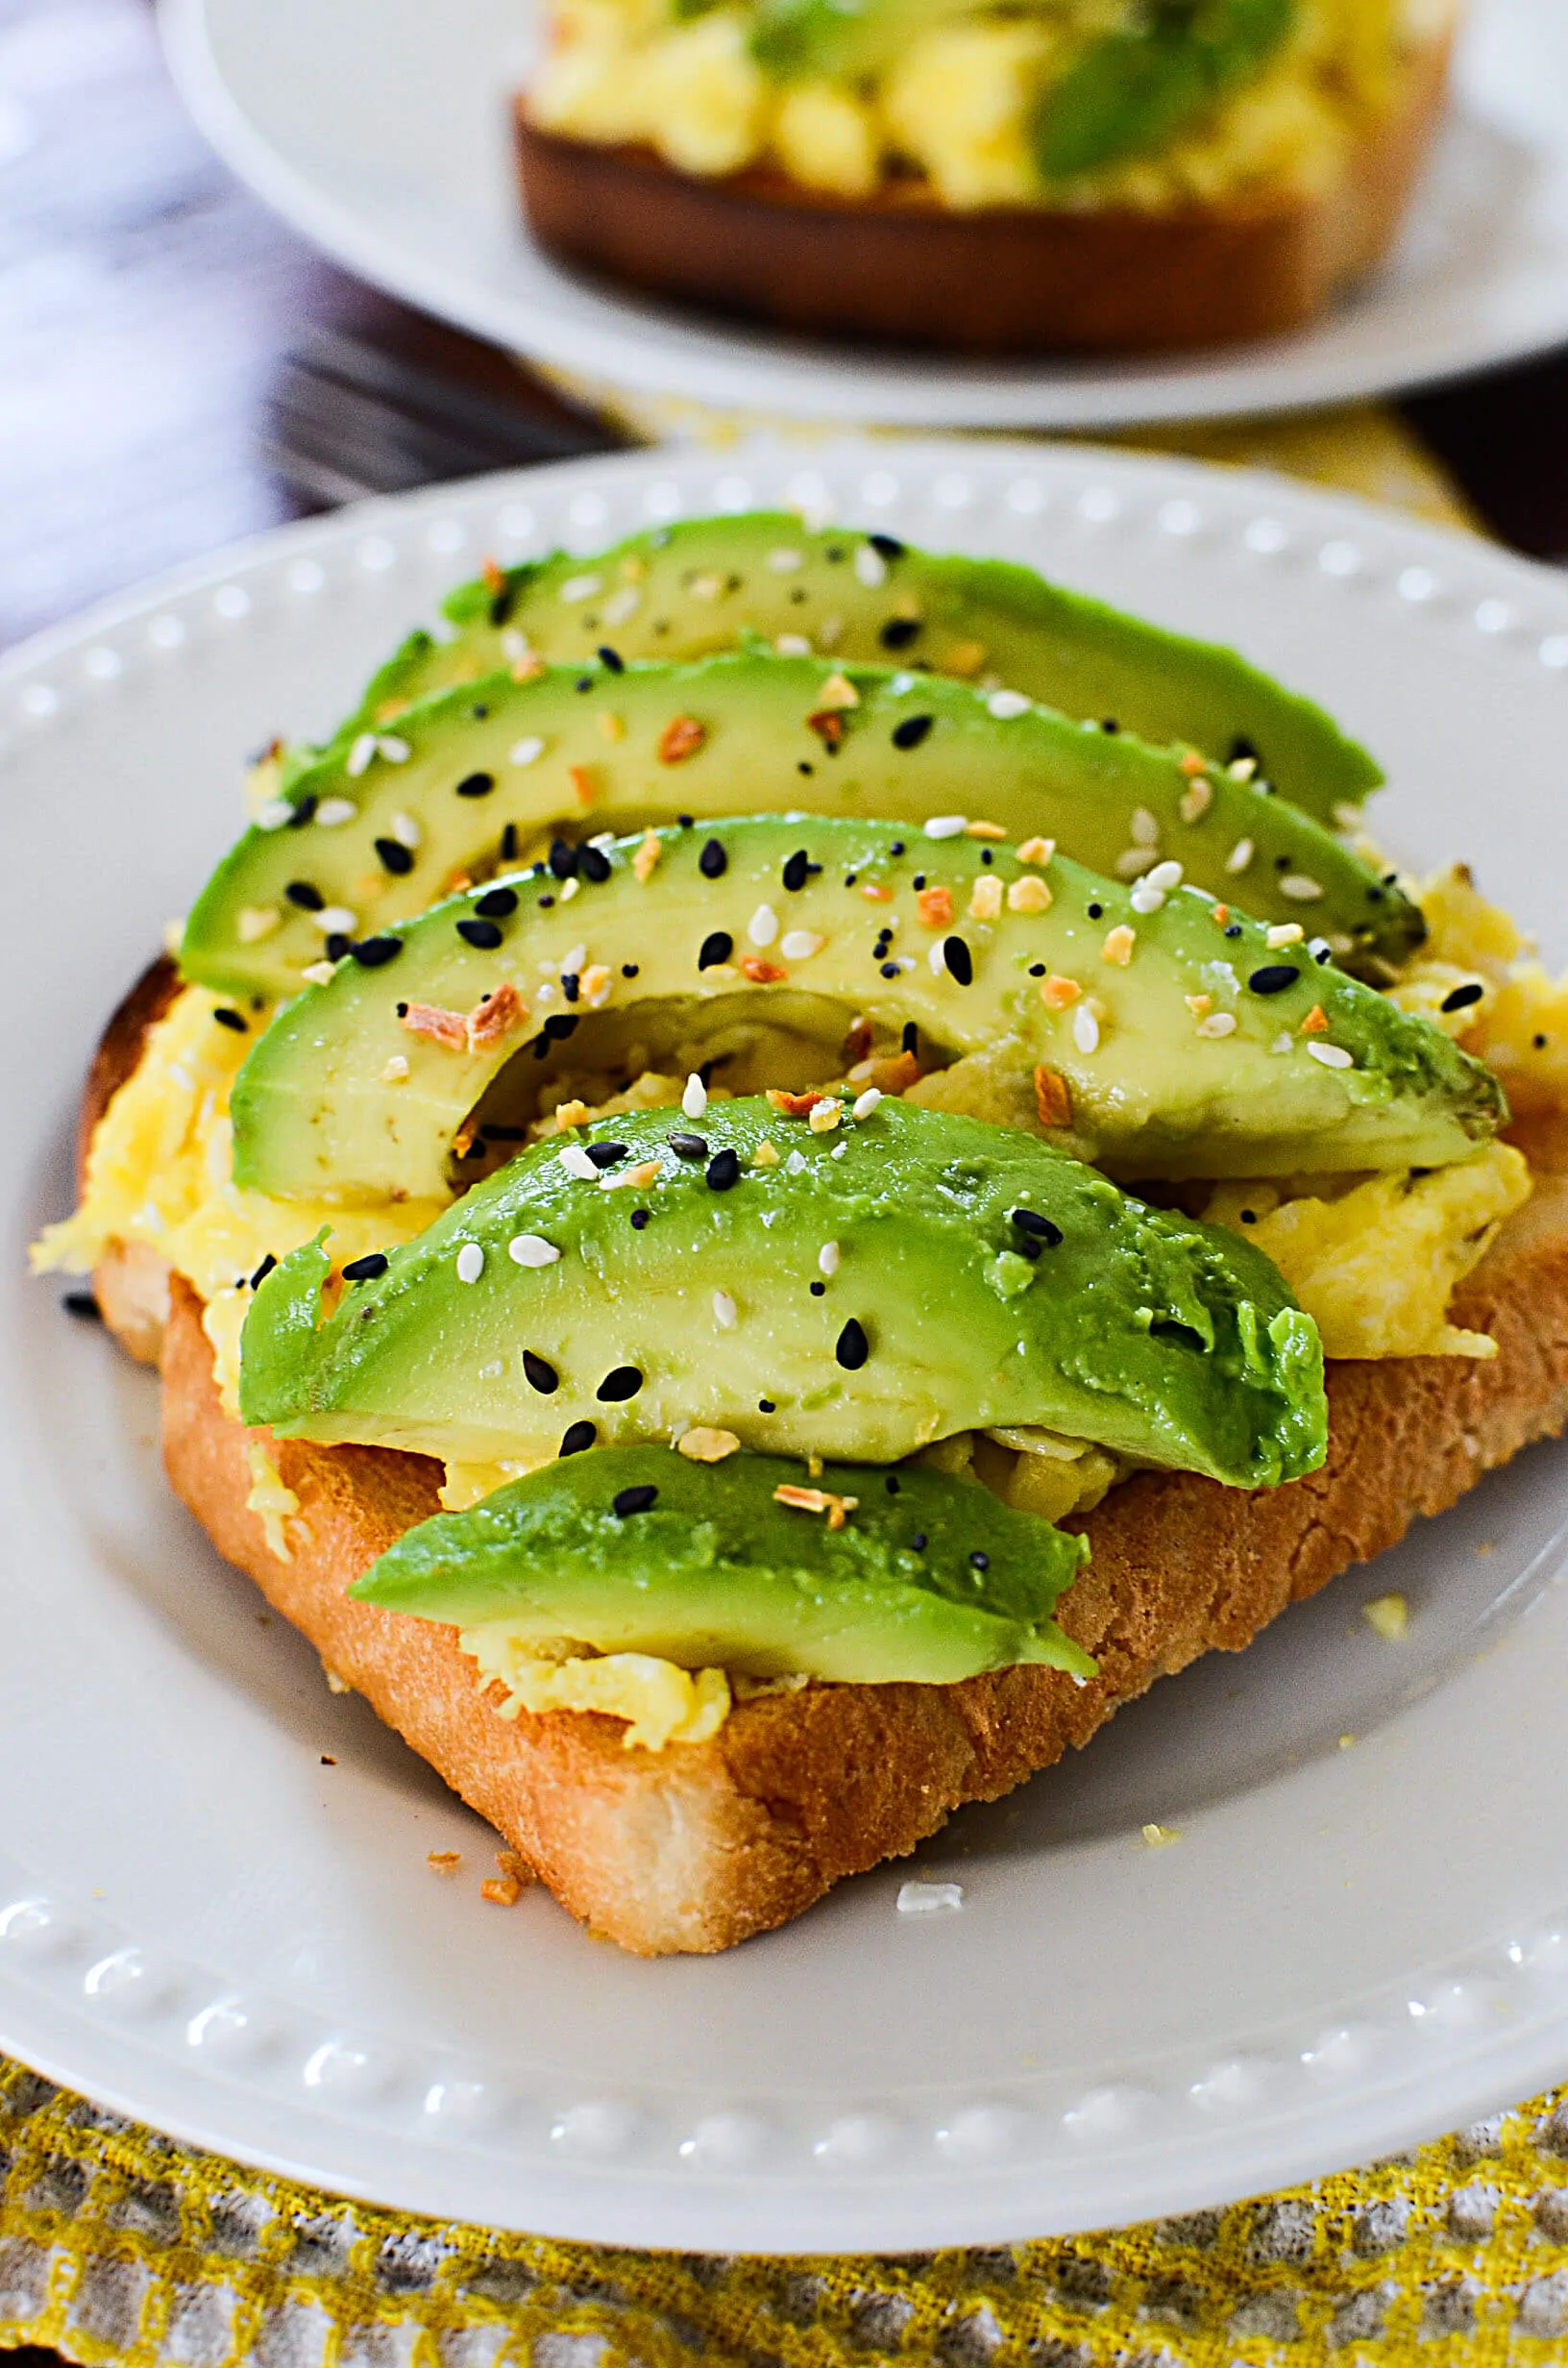 Scrambled eggs and avocado slices on toast, sitting on a white plate.